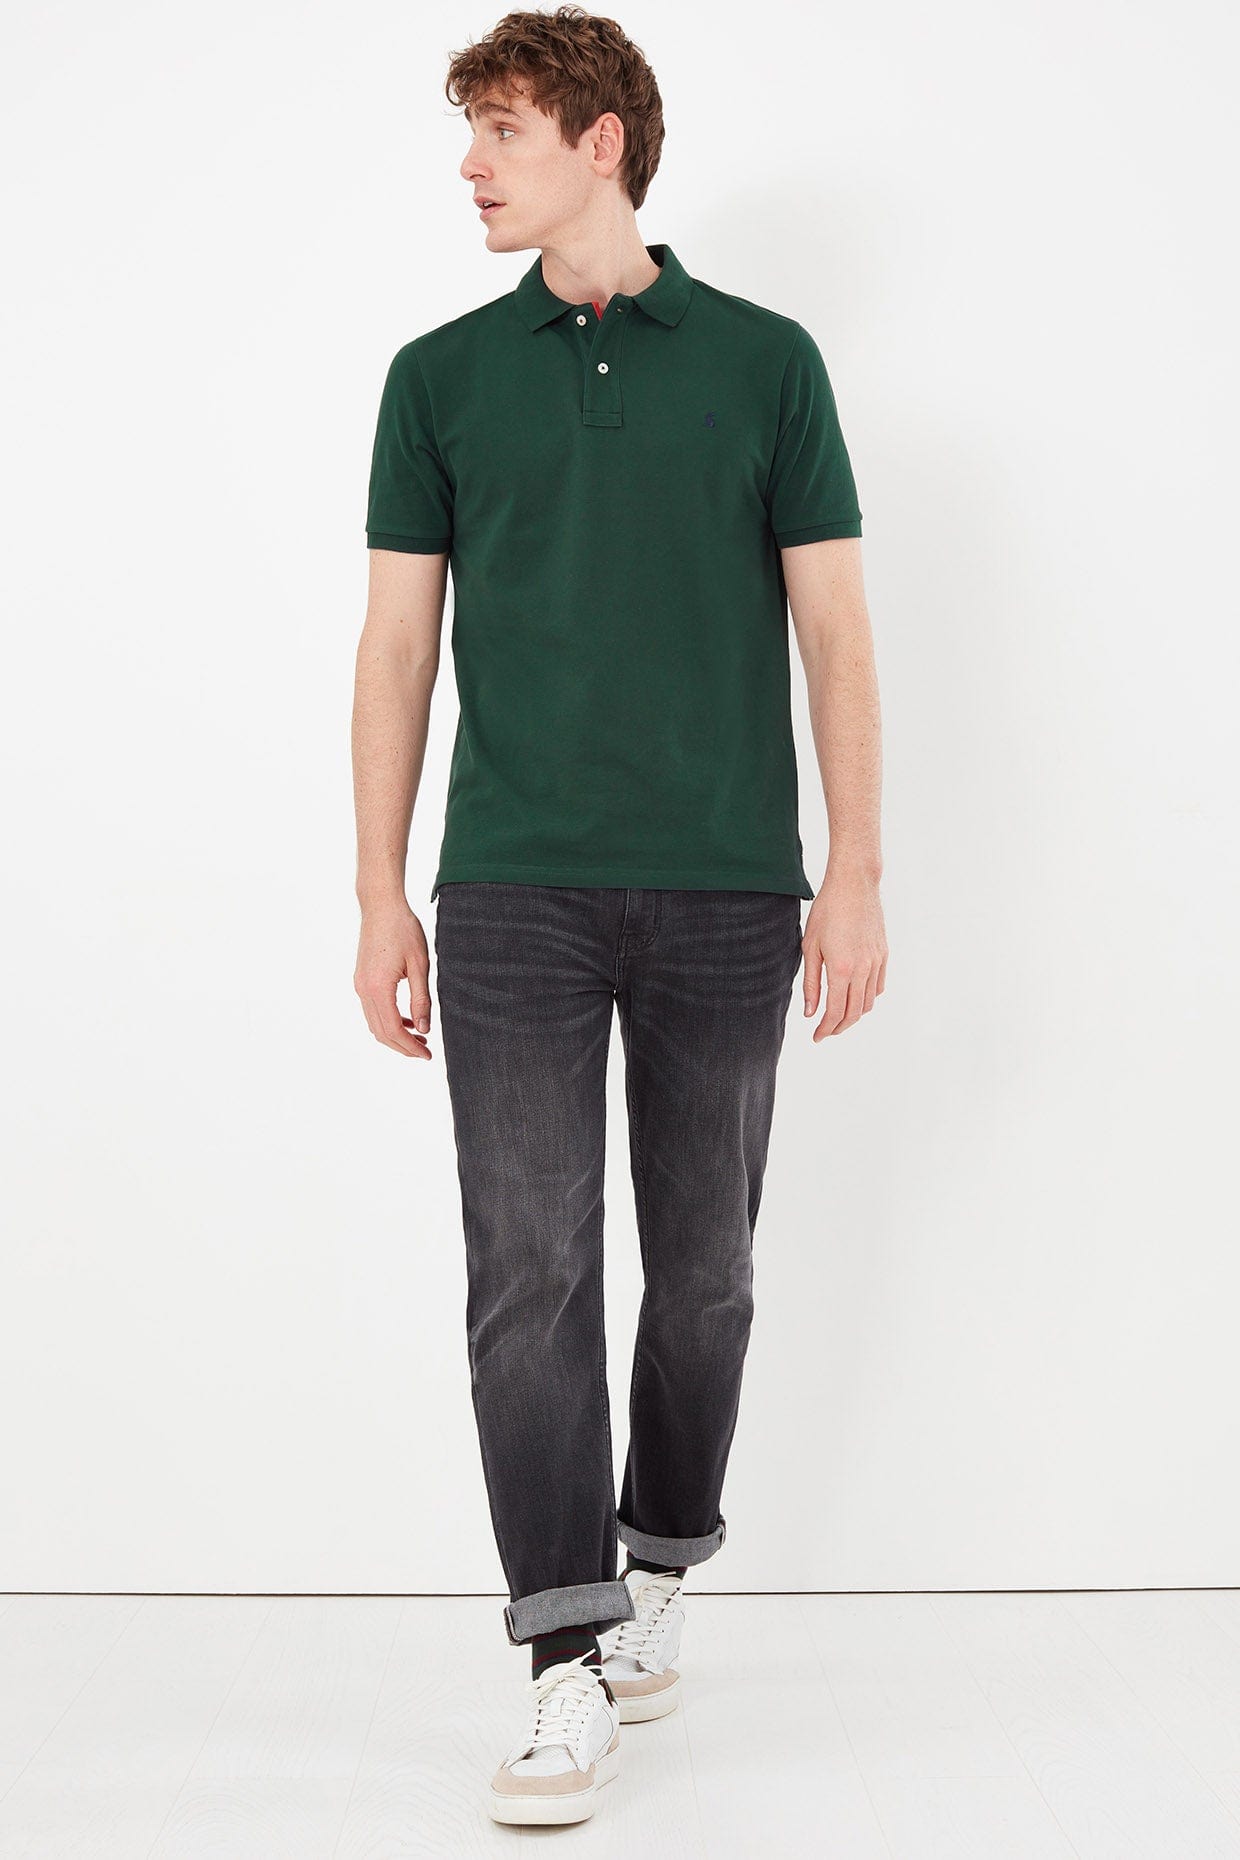 Joules Woody Classic Fit Polo Shirt - Racing Green